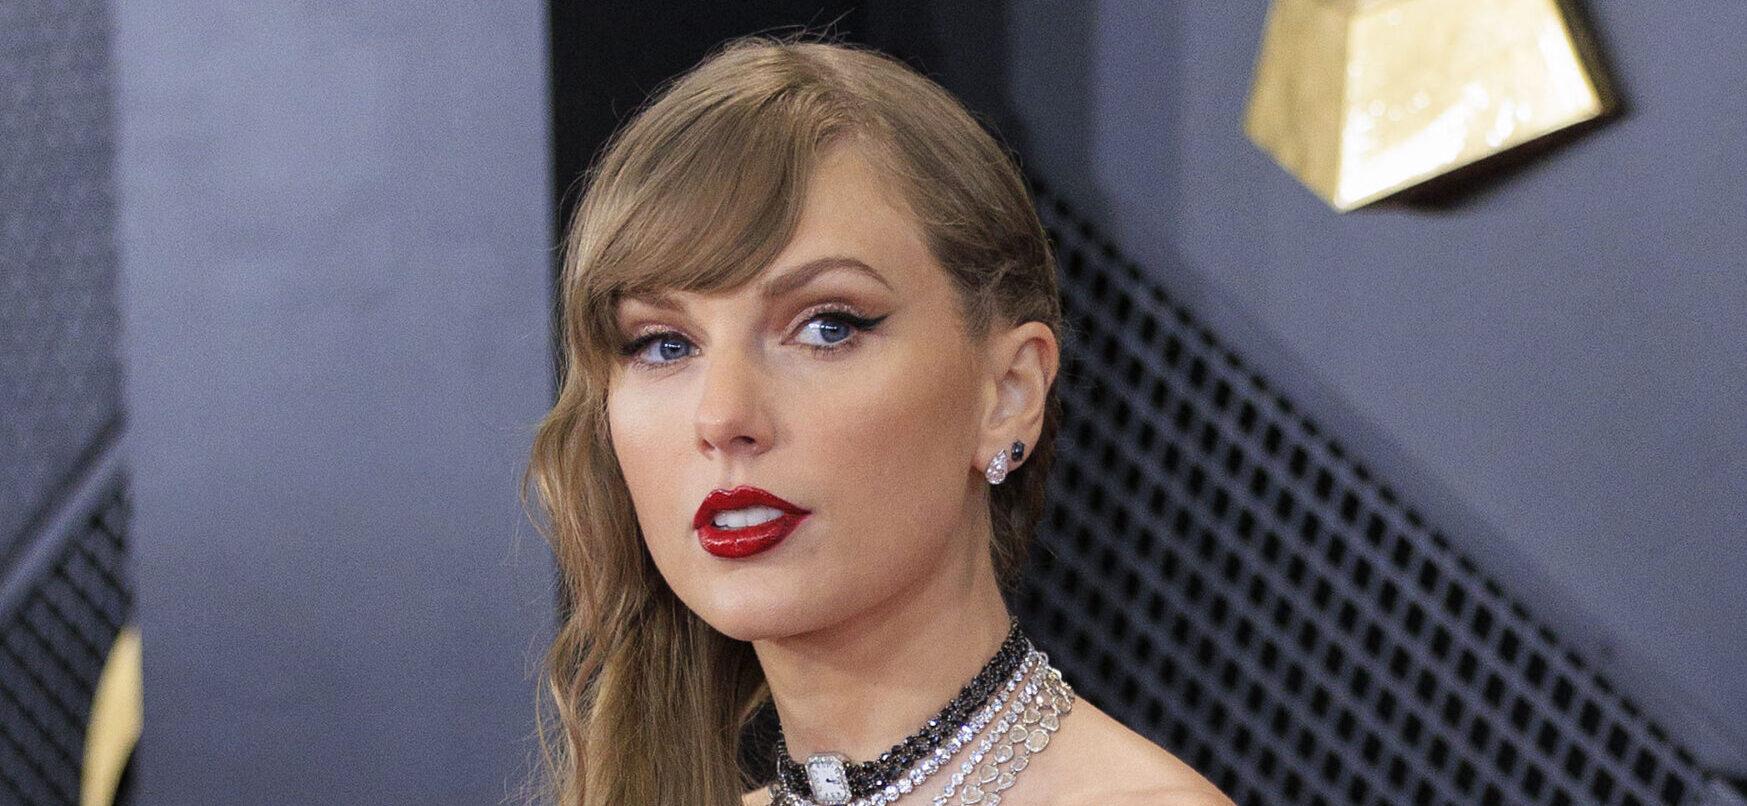 Taylor Swift’s Jet Tracker Defends Actions After Being Slammed With Cease & Desist